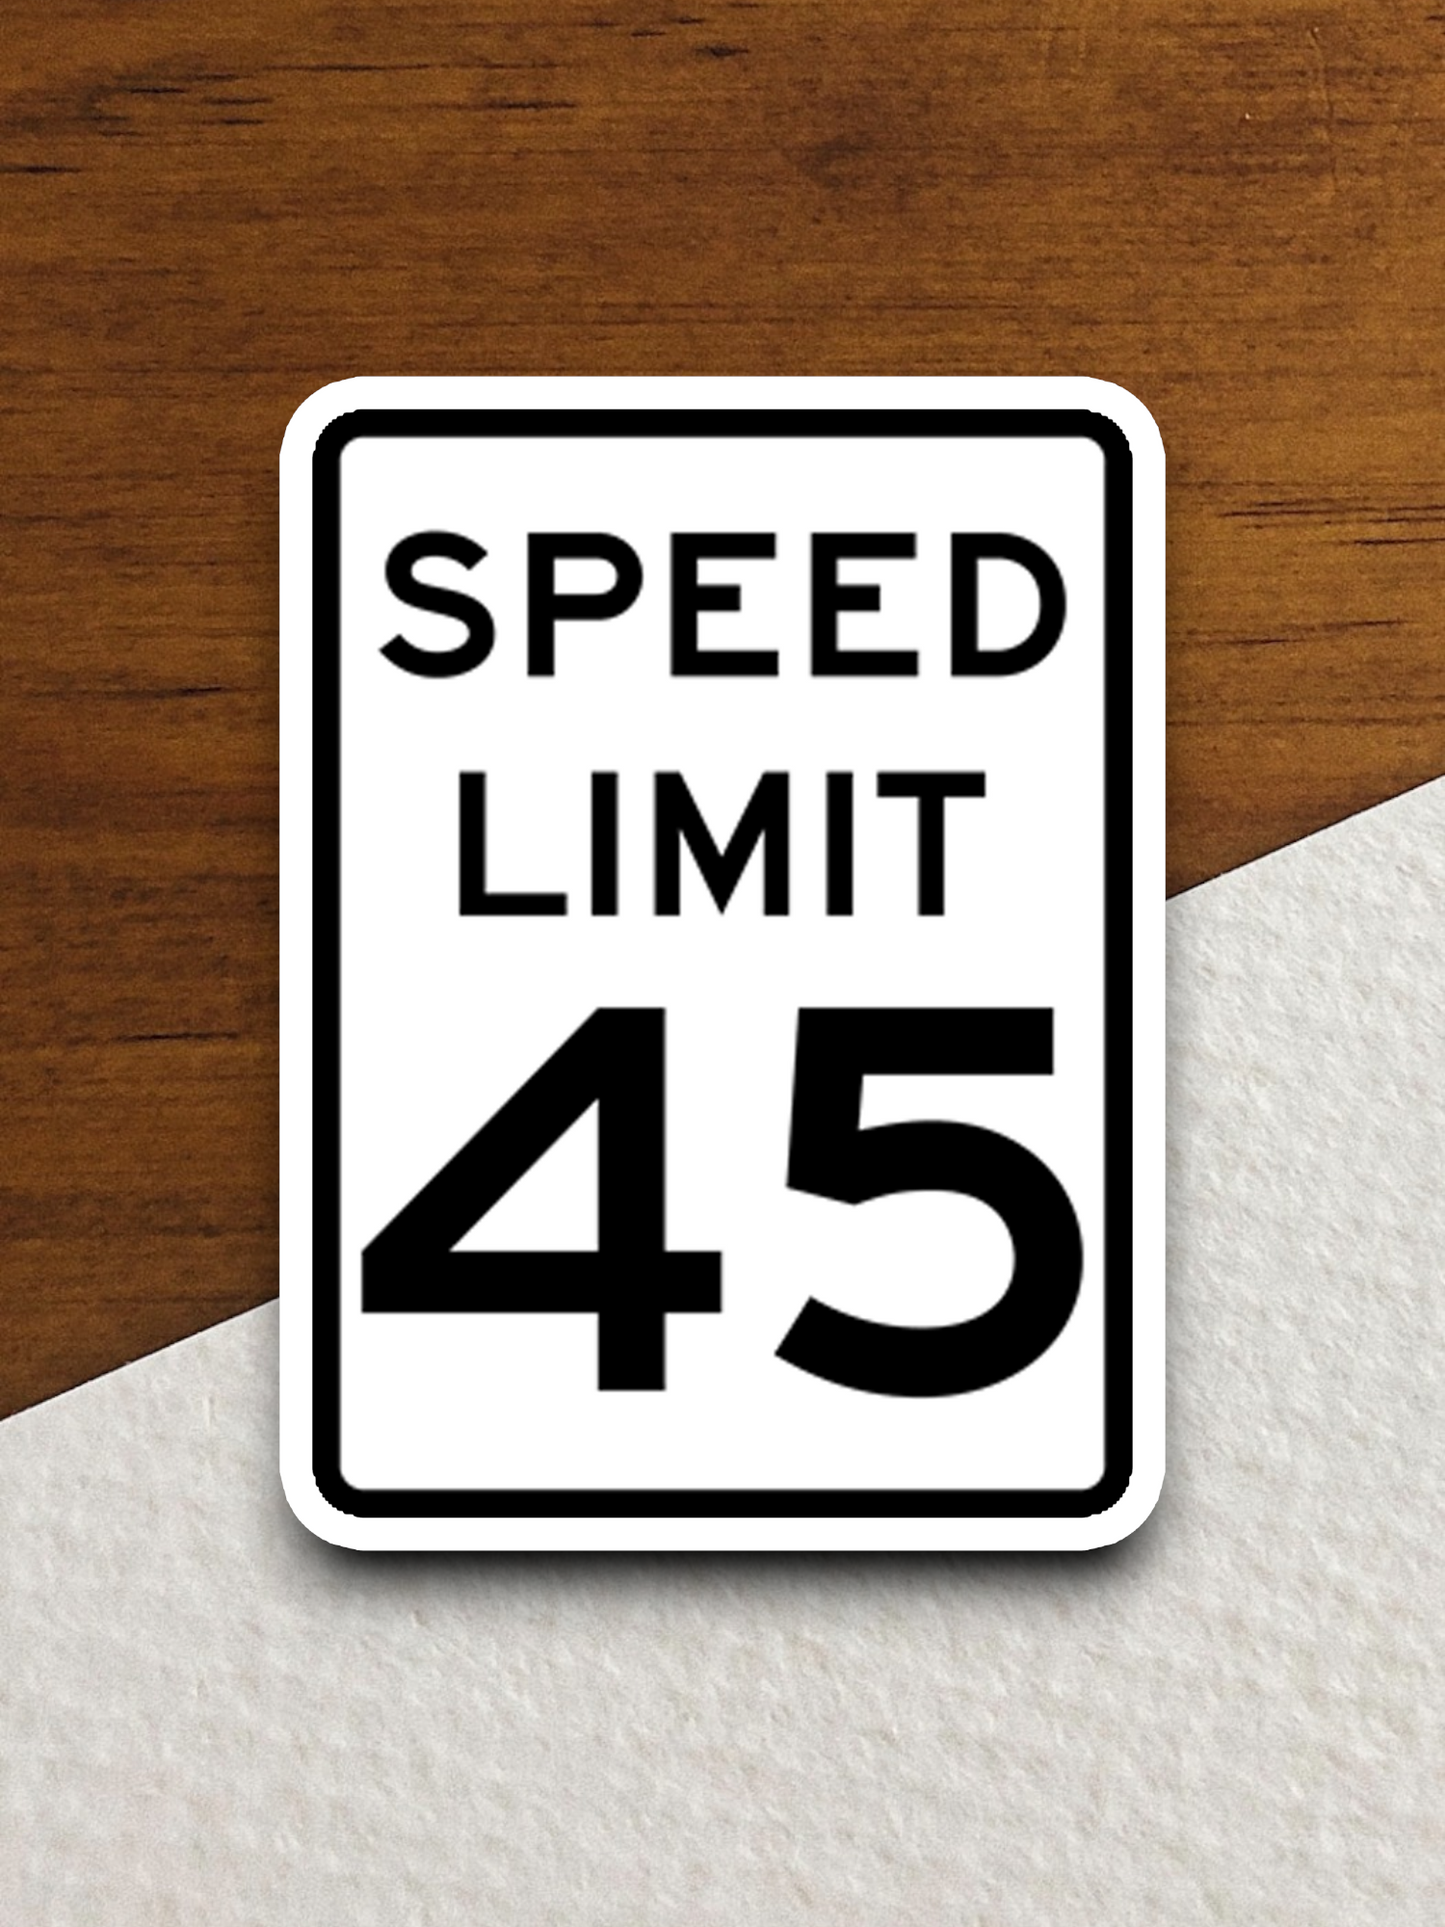 45 Miles Per Hour Speed Limit Road Sign Sticker